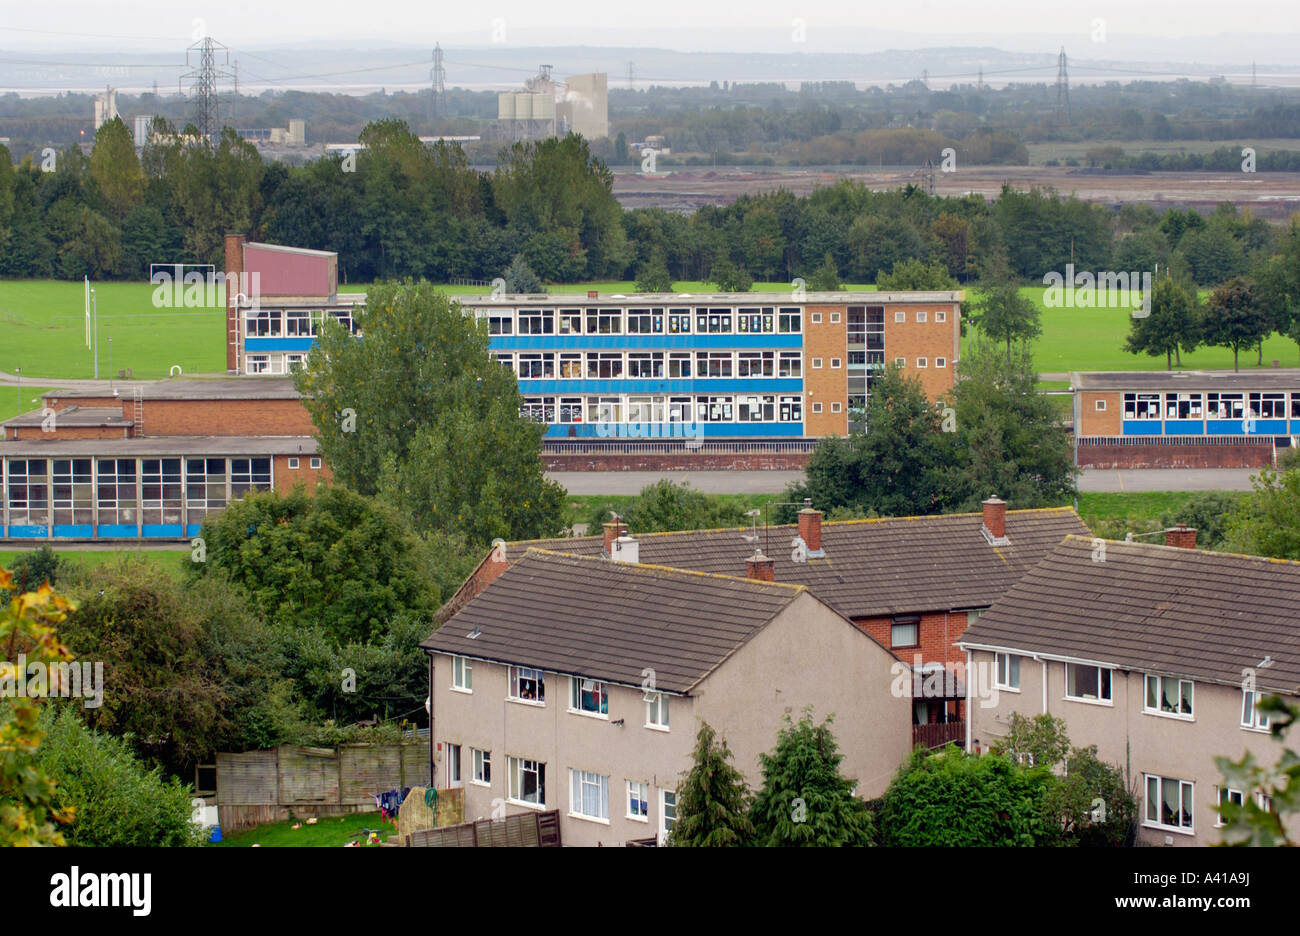 Hartridge High School Newport South Wales UK viewed over Ringland housing estate to industrial area beyond Stock Photo